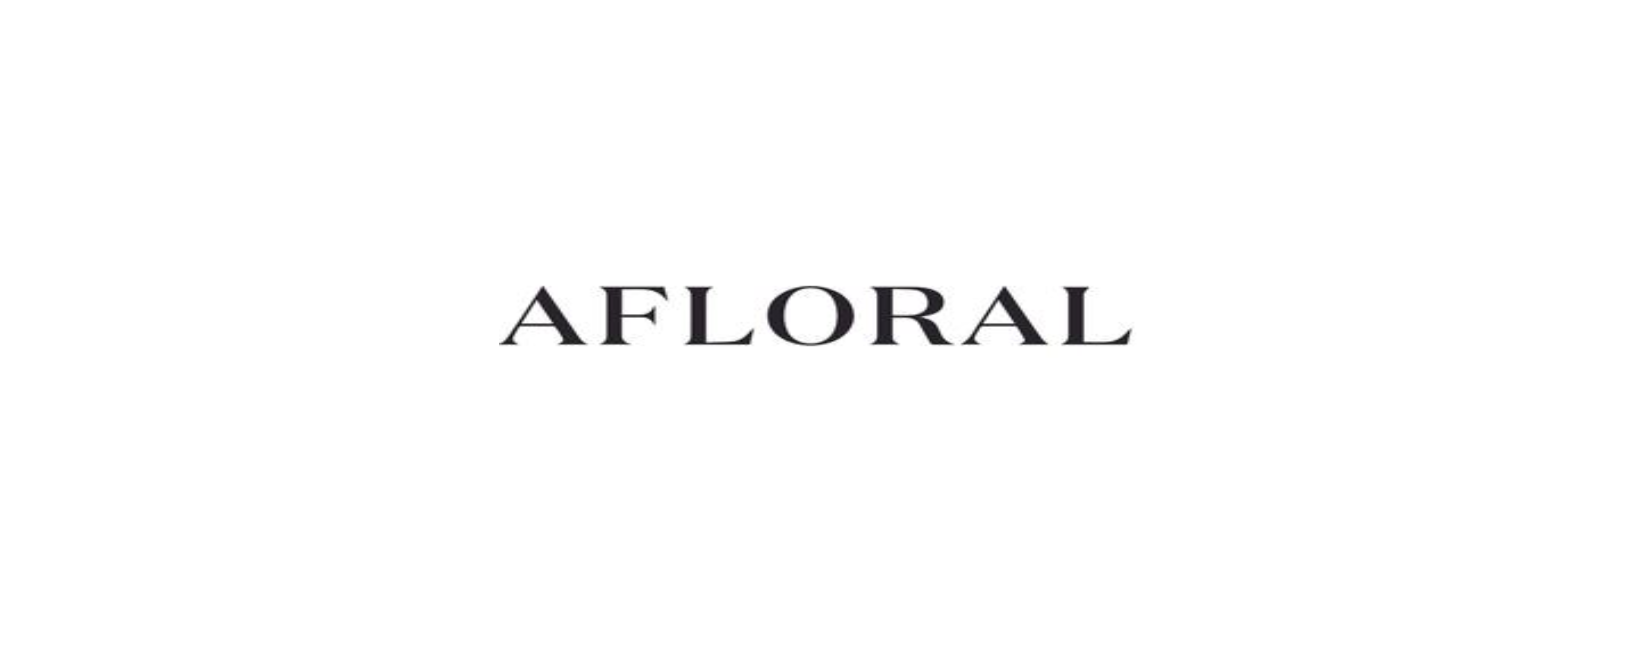 Afloral Discount Codes 2022